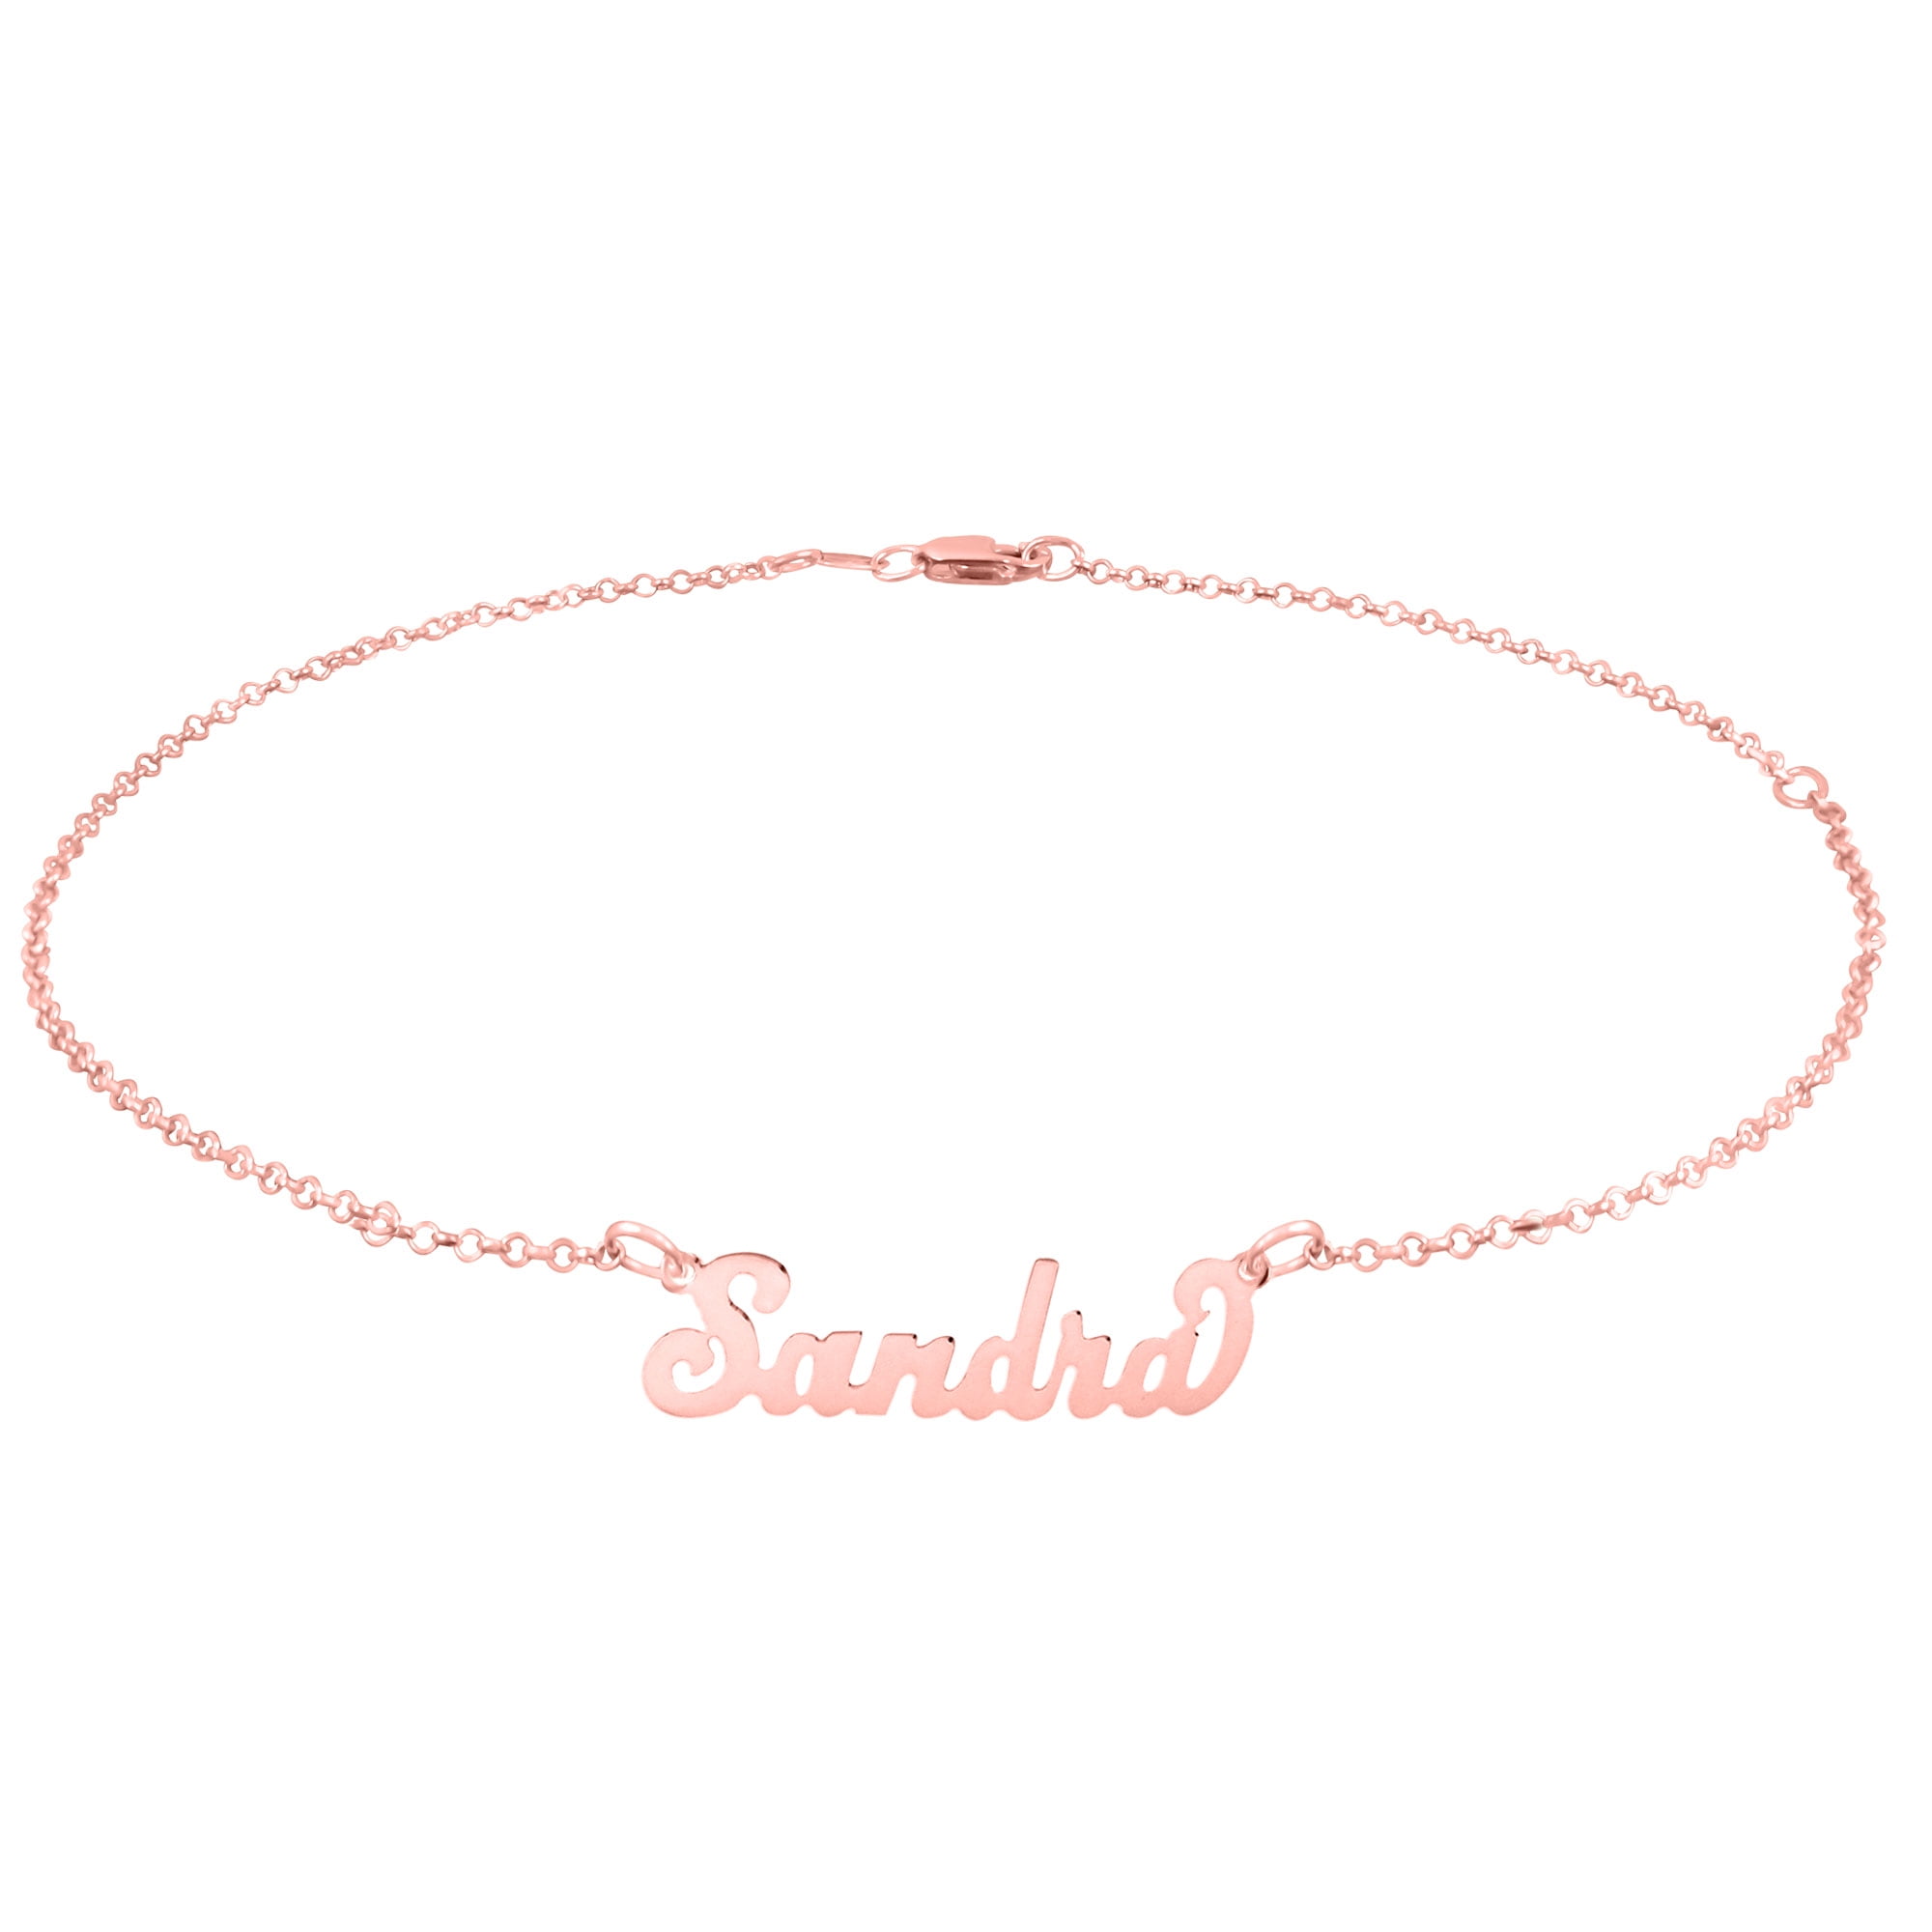 Monogram Bracelet or Anklet with Personalized Initials & Triple Chain -  Solid Gold, Sterling Silver, Yellow Gold or Rose Gold